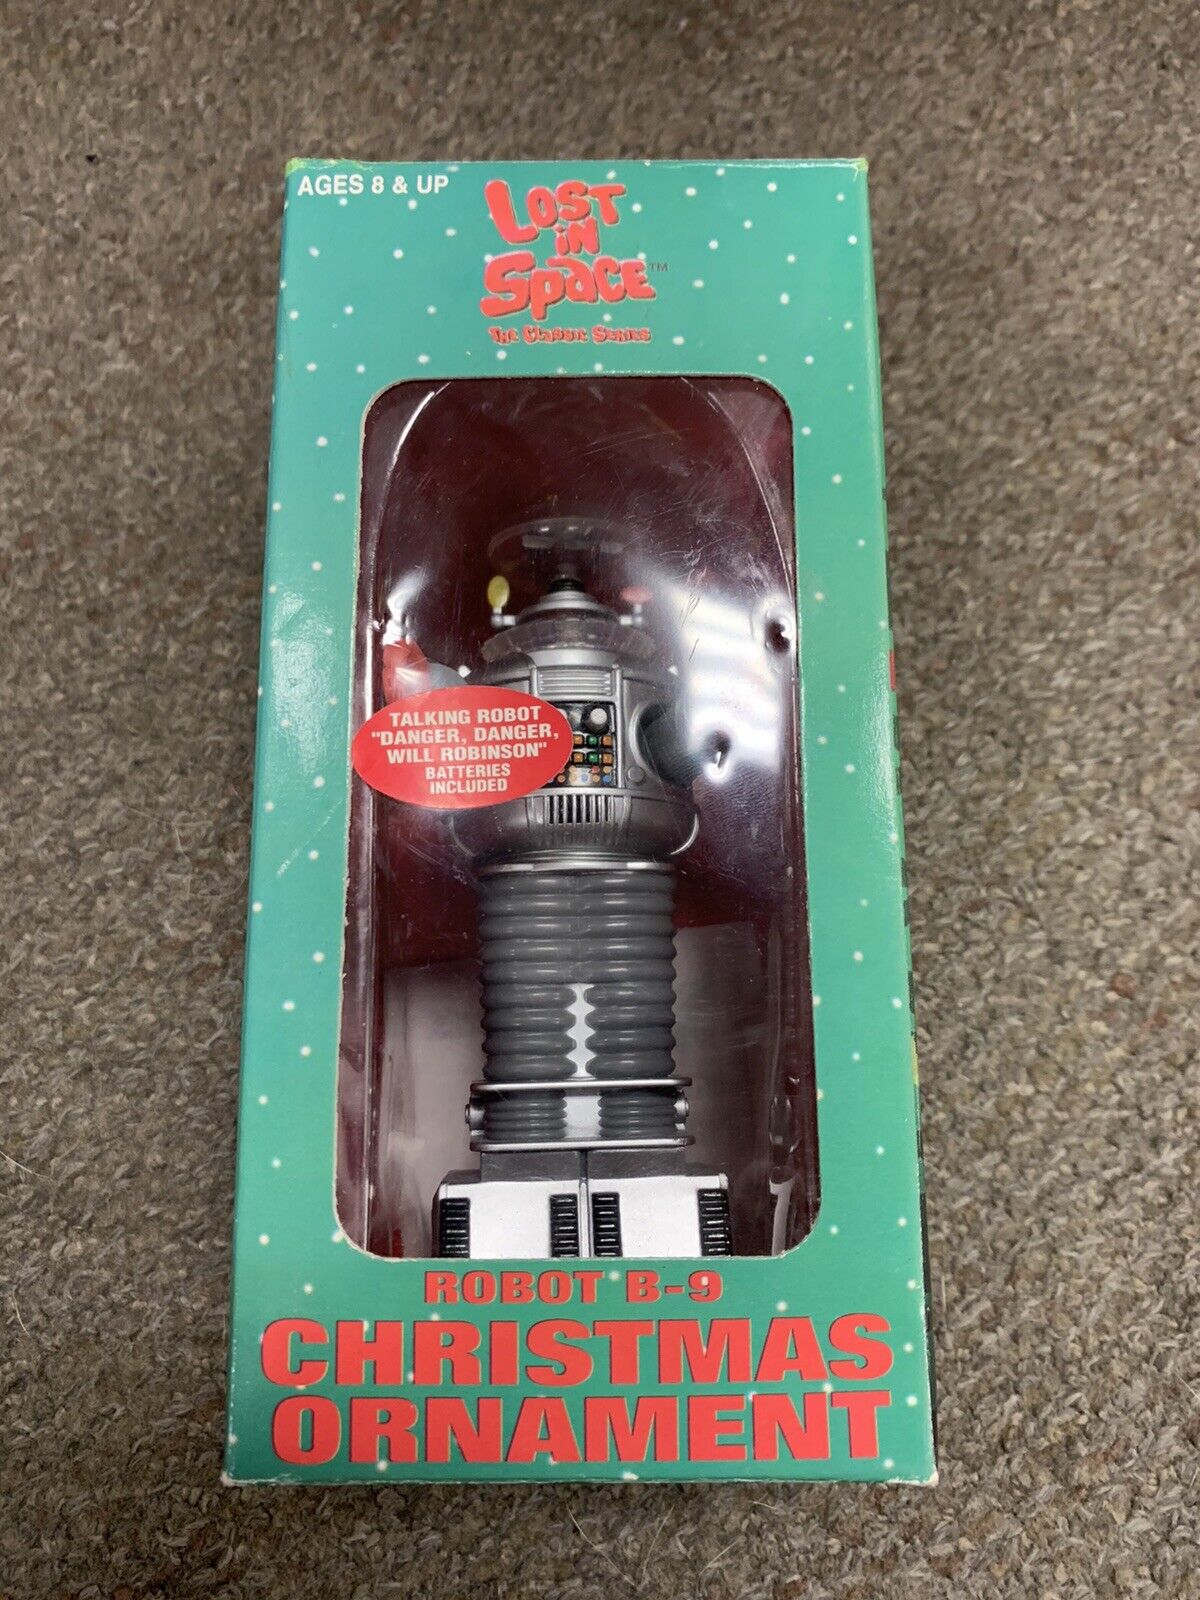 * SPACE PRODUCTIONS ROBOT B-9 LOST IN SPACE CHRISTMAS ORNAMENT *ST